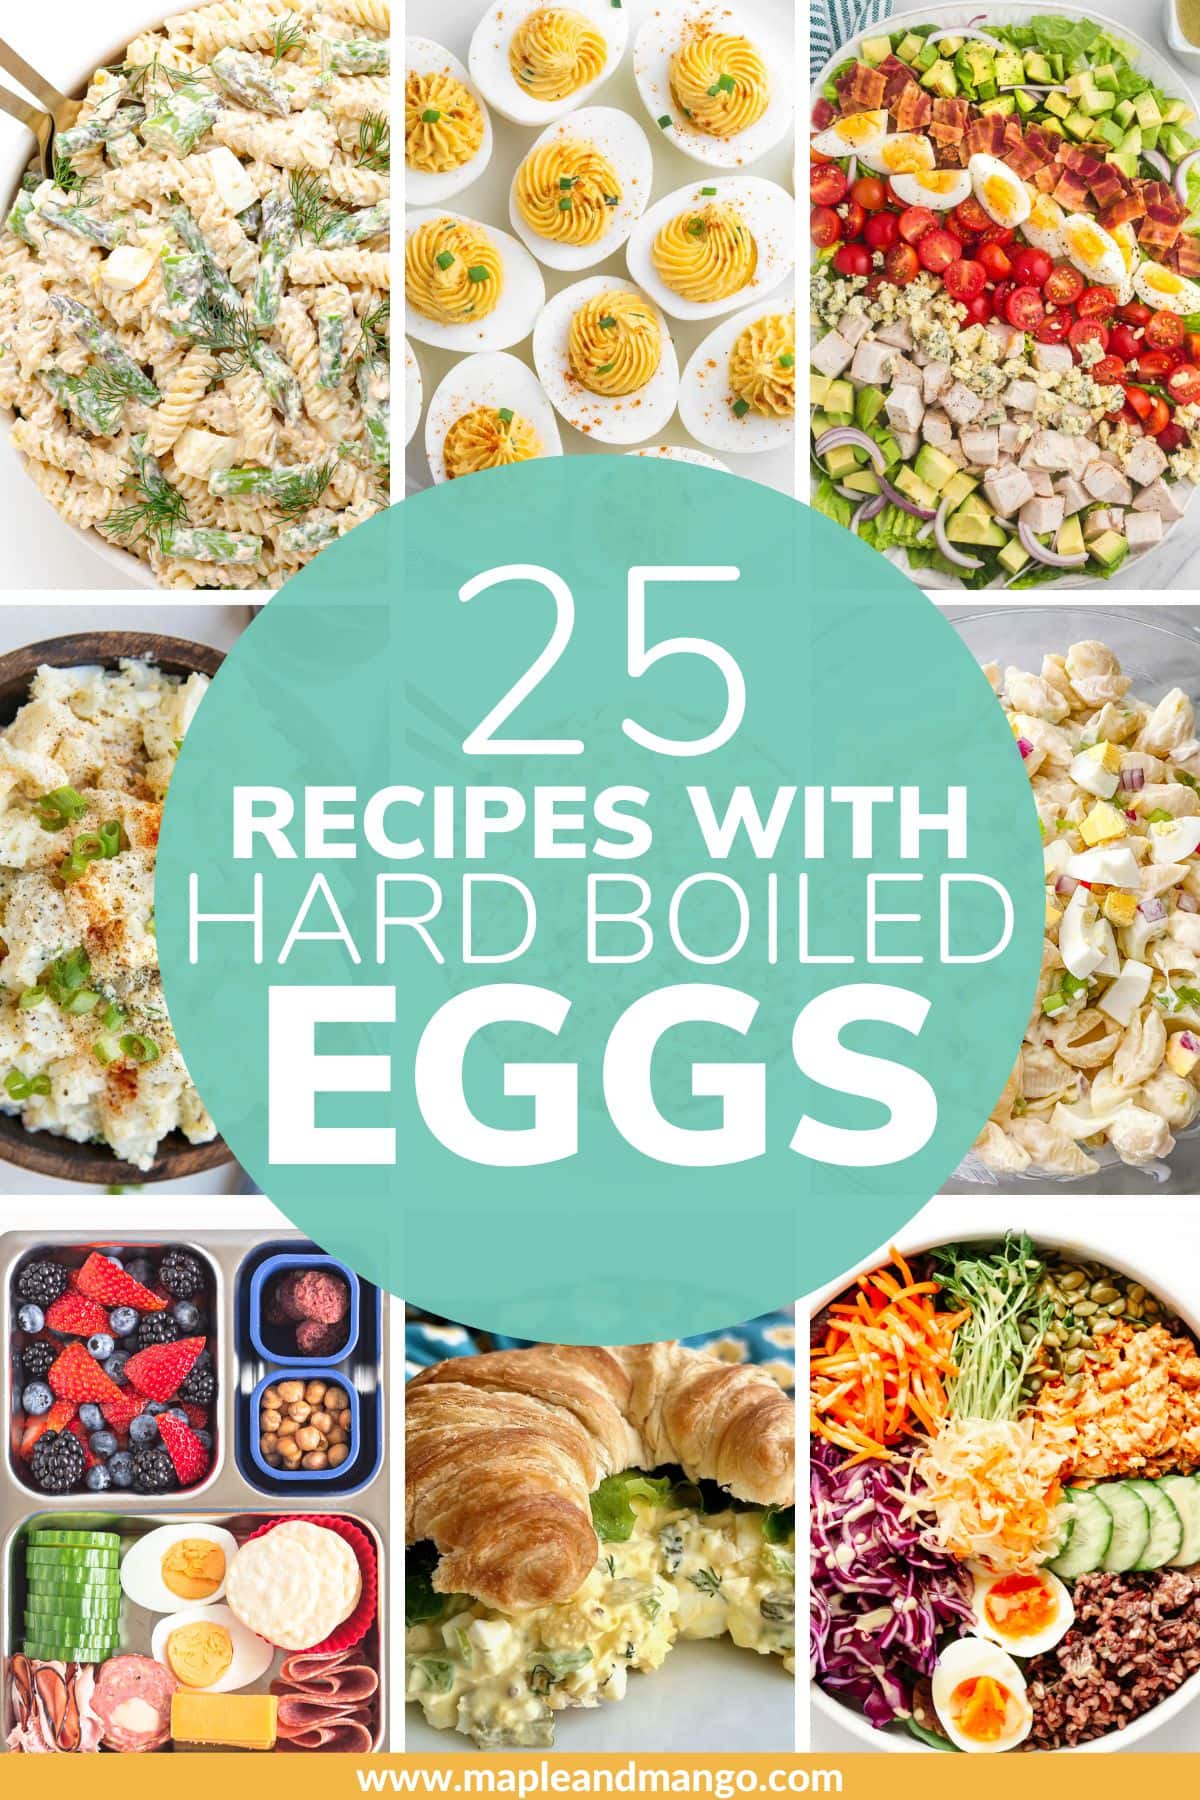 Photo collage of different dishes that can be made with boiled eggs and text overlay that reads "25 Recipes With Hard Boiled Eggs".